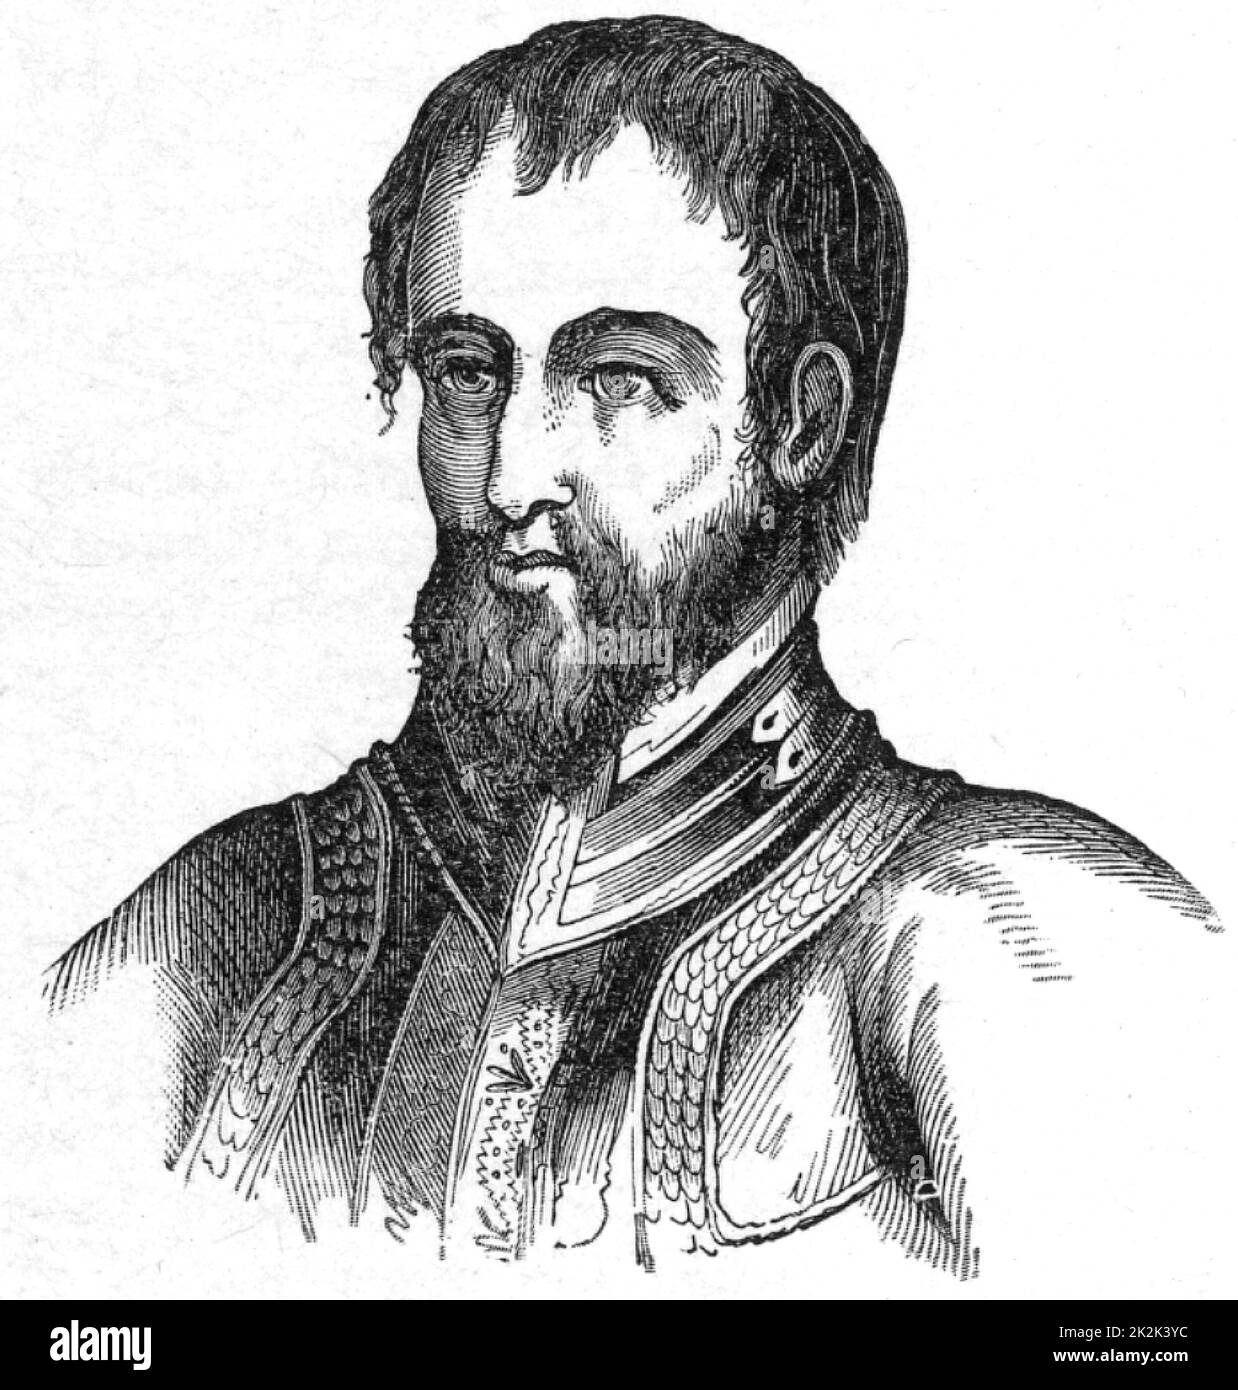 Fernando de Soto (c1496-1542) Spanish explorer and conquistador born at Xeres (Jerez) de los Caballeros, Estramadura, Spain. A member of the Spanish expedition to Darien (1518-1520), served in Nicaragua (1527) and assisted Pizzaro in the conquest of Peru. Appointed governor of Cuba by the Emperor Charles V and given permission to conquer Florida, where he landed in May 1539. Died of fever and was buried in the Mississippi River. Engraving. Stock Photo